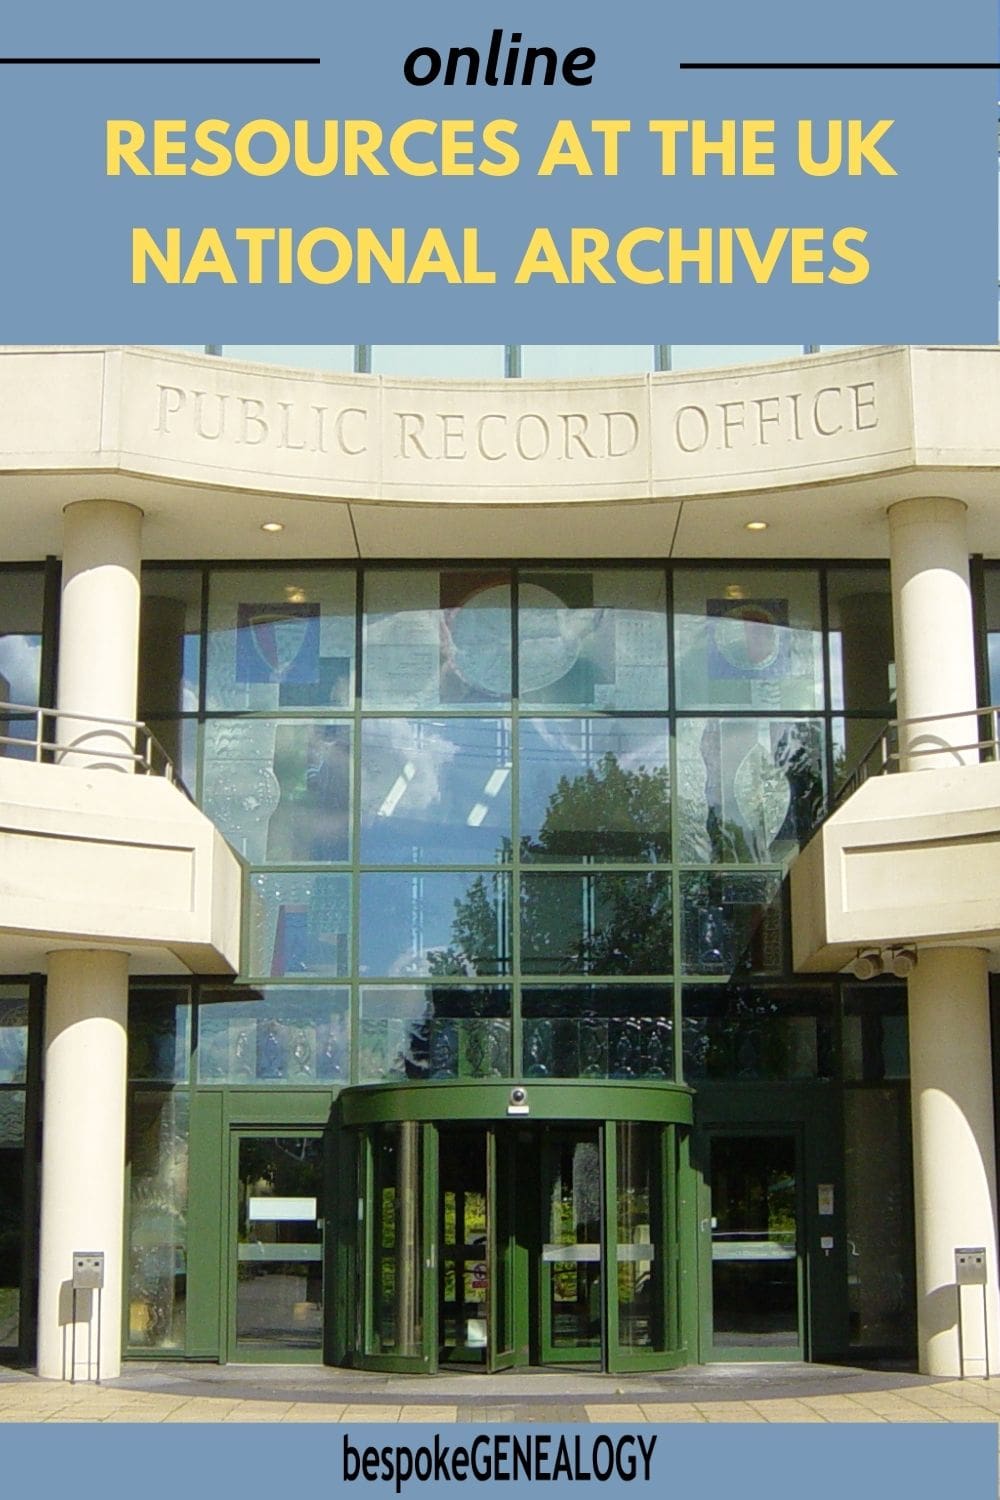 Online resources at the UK National Archives. Photo of the front entrance of the National Archives